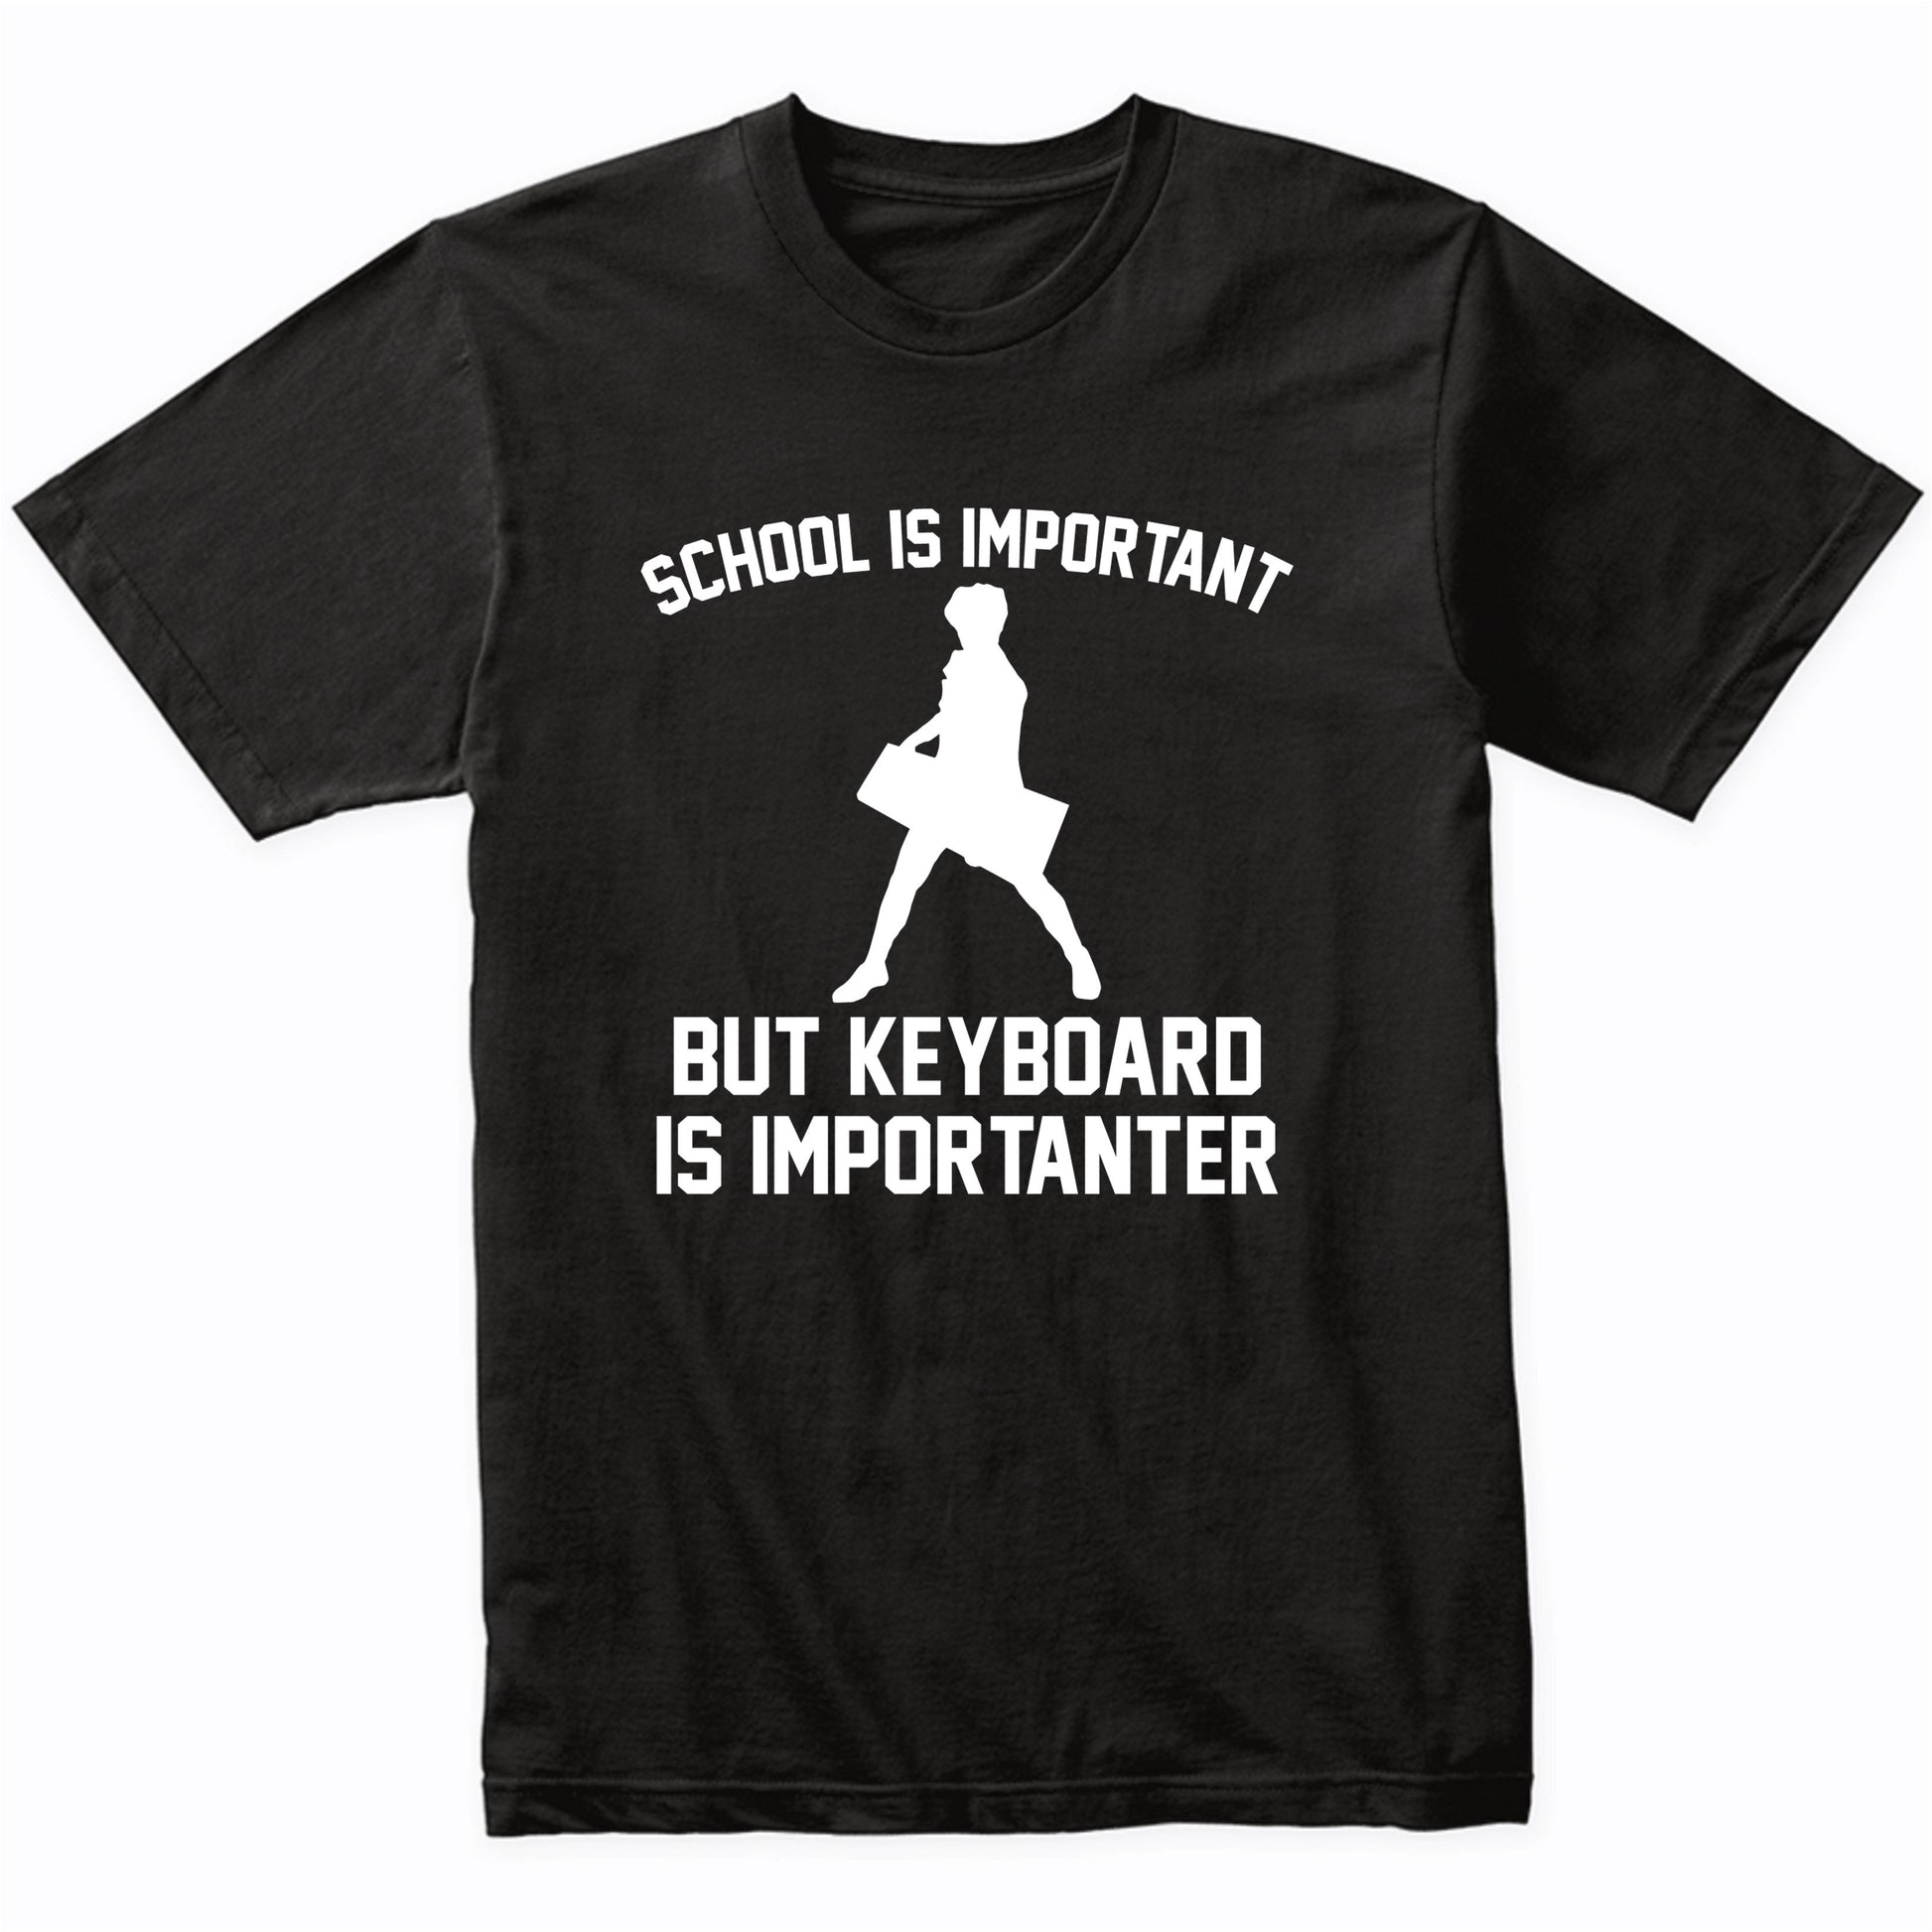 School Is Important But Keyboard Is Importanter Funny Shirt